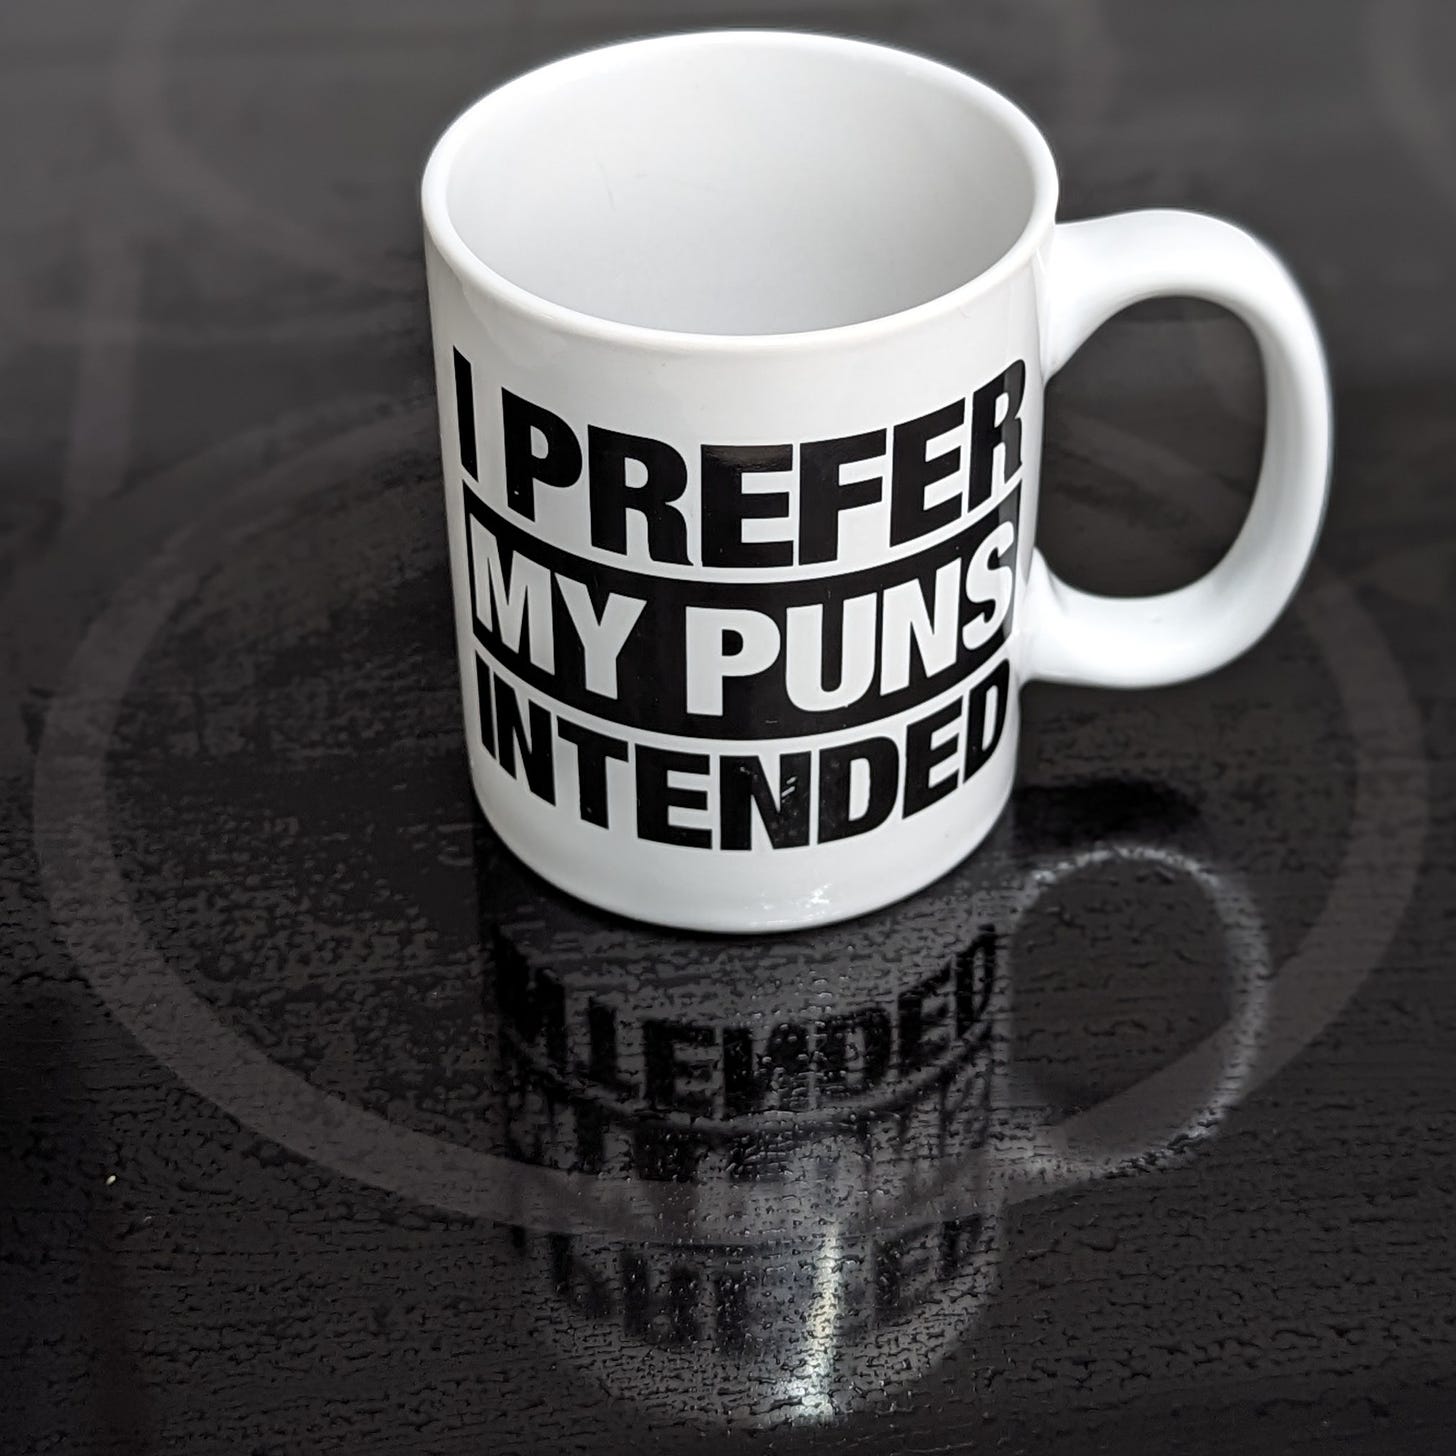 A coffee mug that says "I prefer my puns intended"